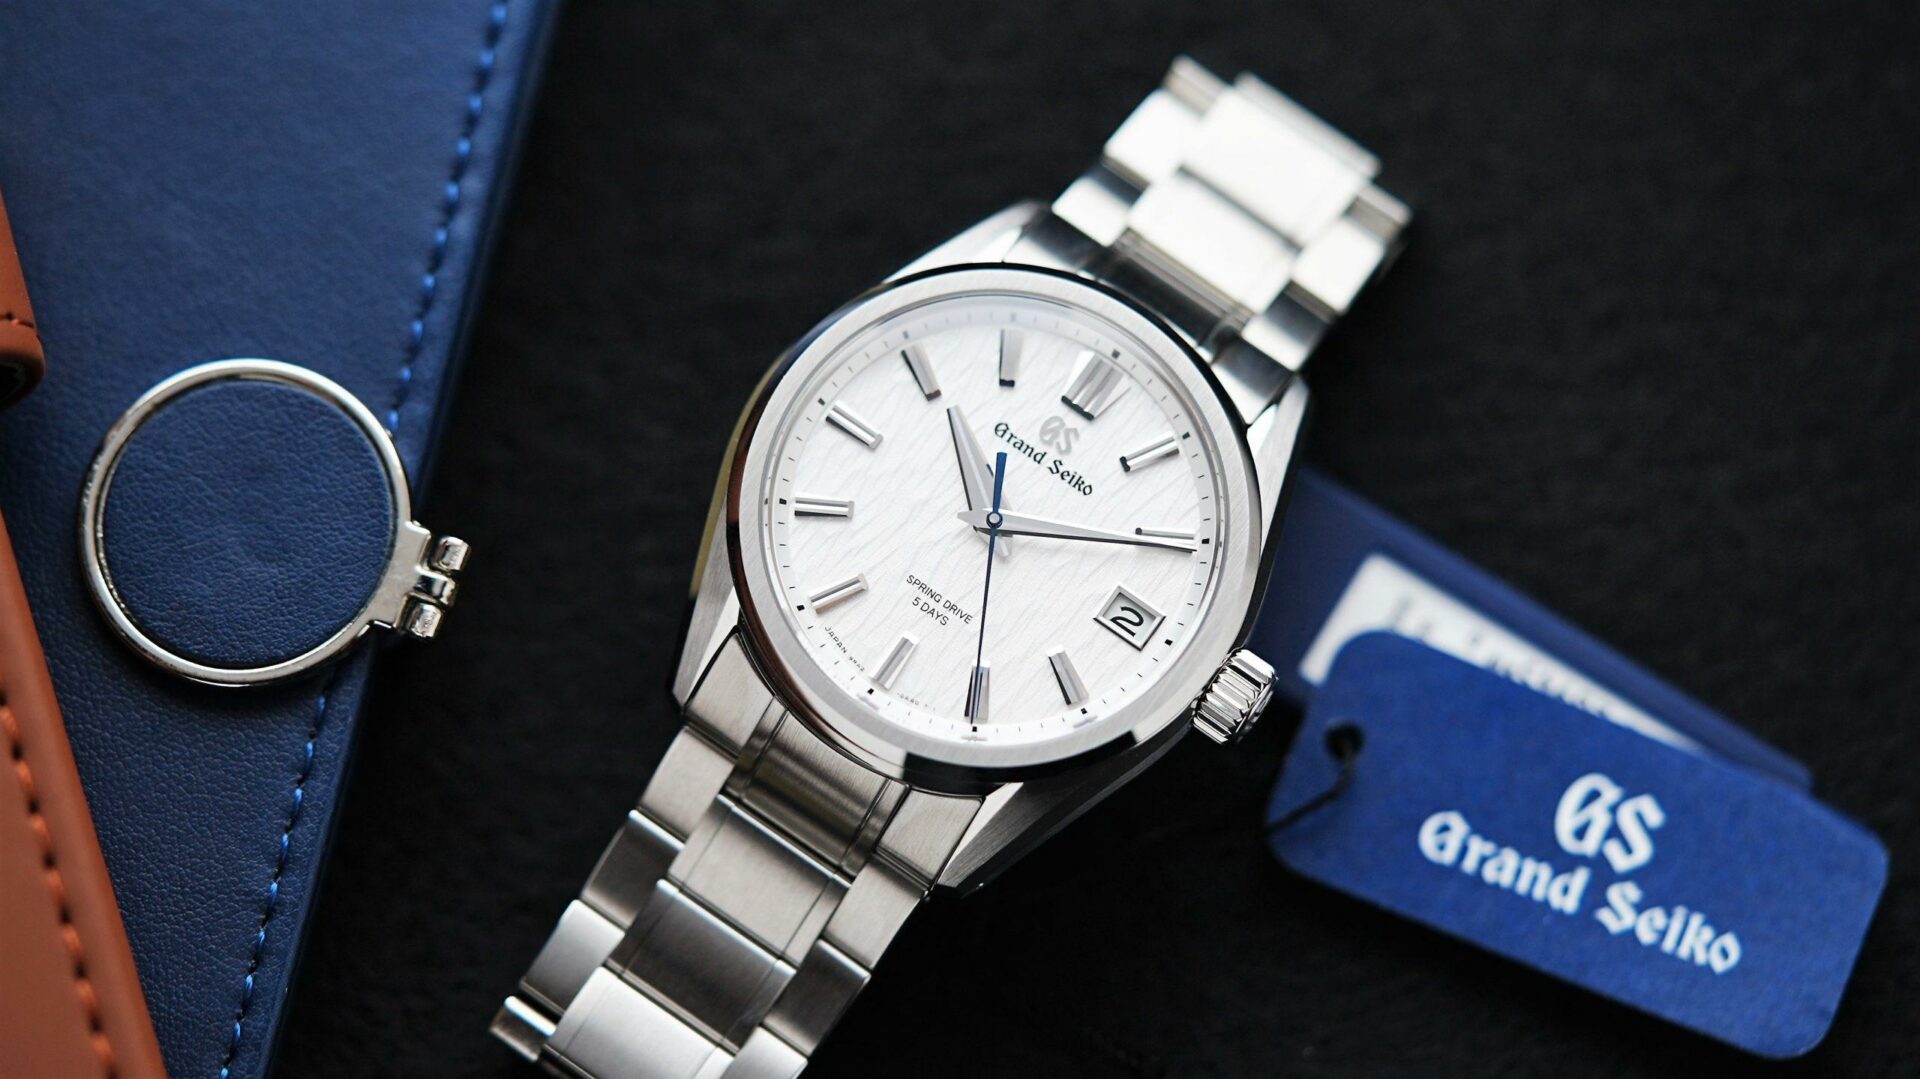 Grand Seiko Heritage Collection White Birch featured with blue tags attatched.